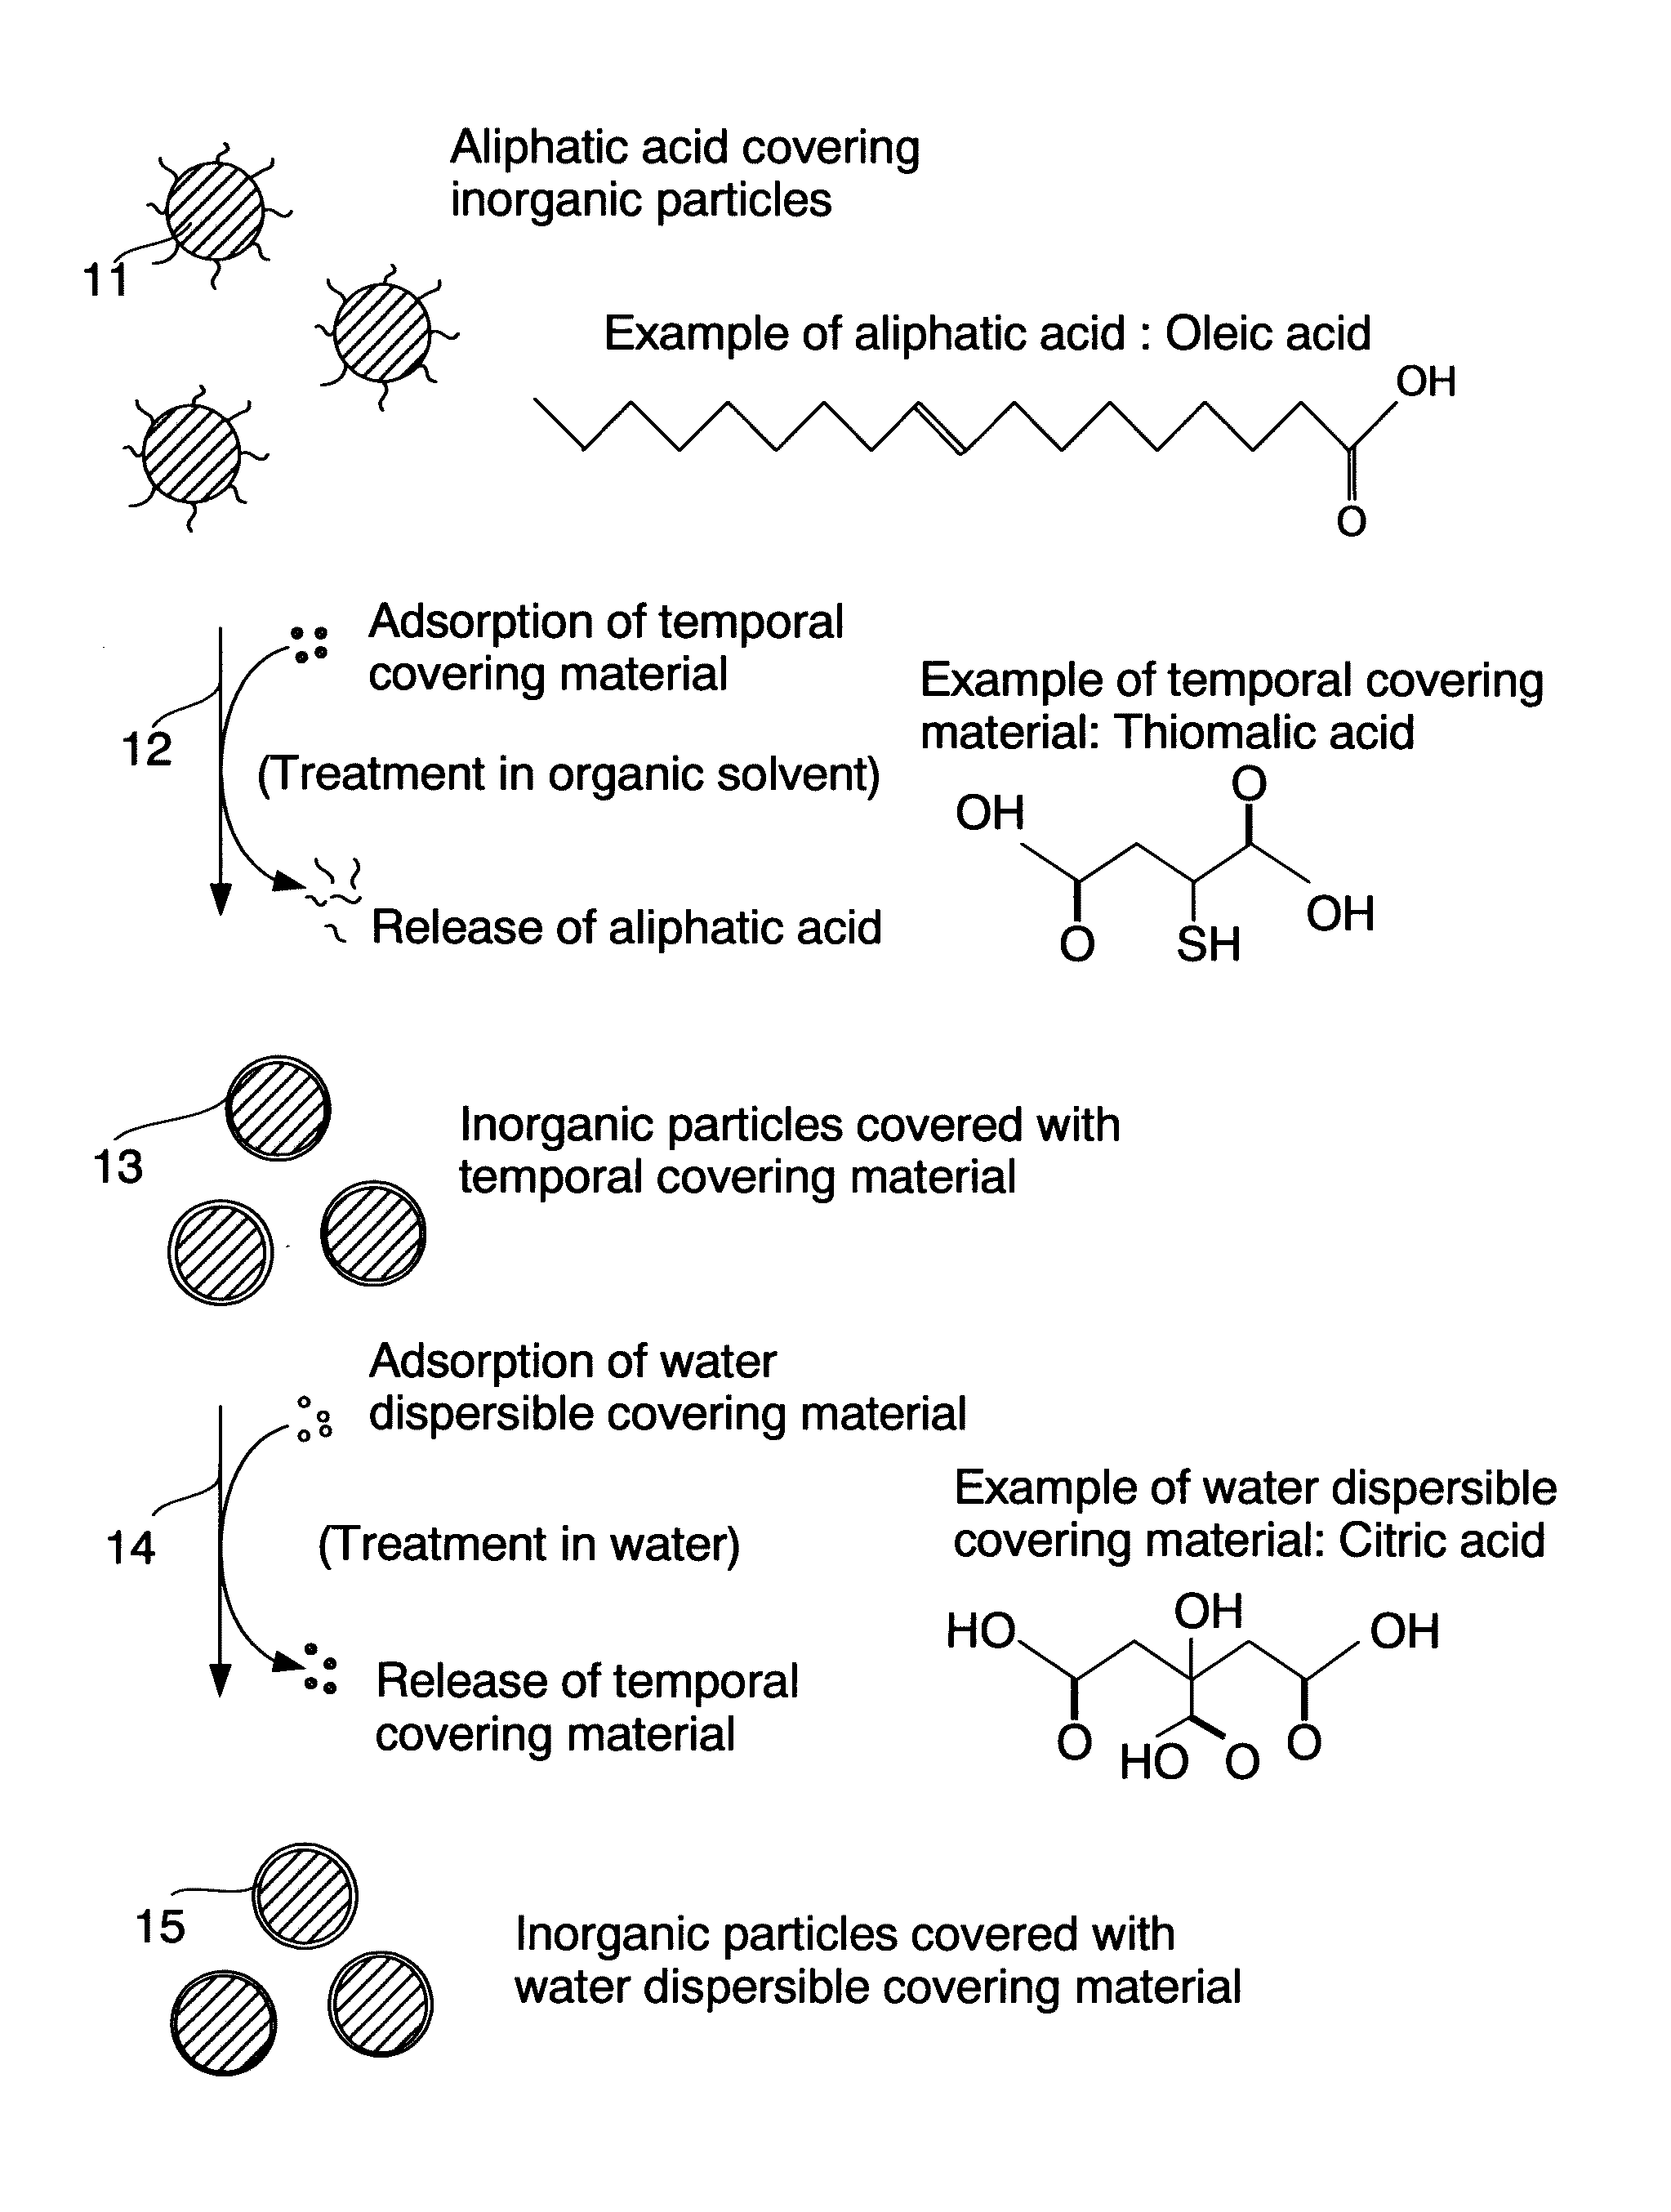 Process for production of surface-coated inorganic particles